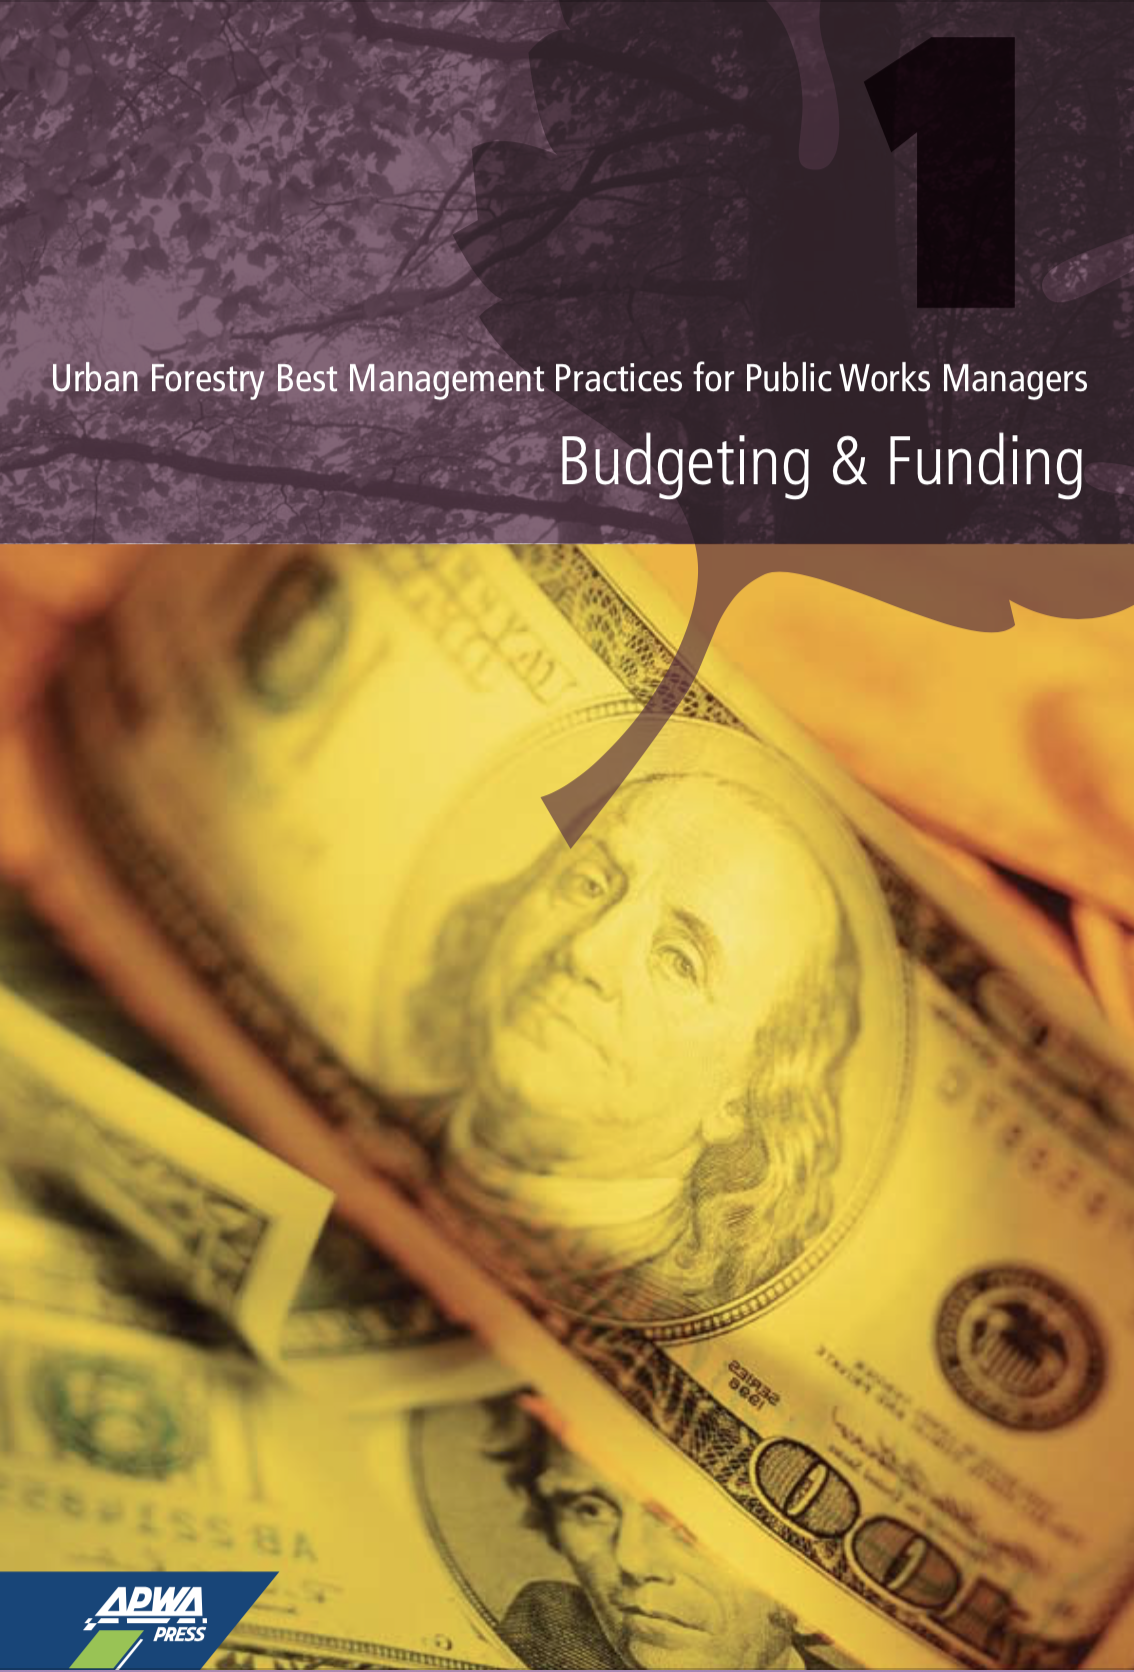 Urban Forestry Best Management Practices for Public Works Managers: Budgeting & Funding [PUB]